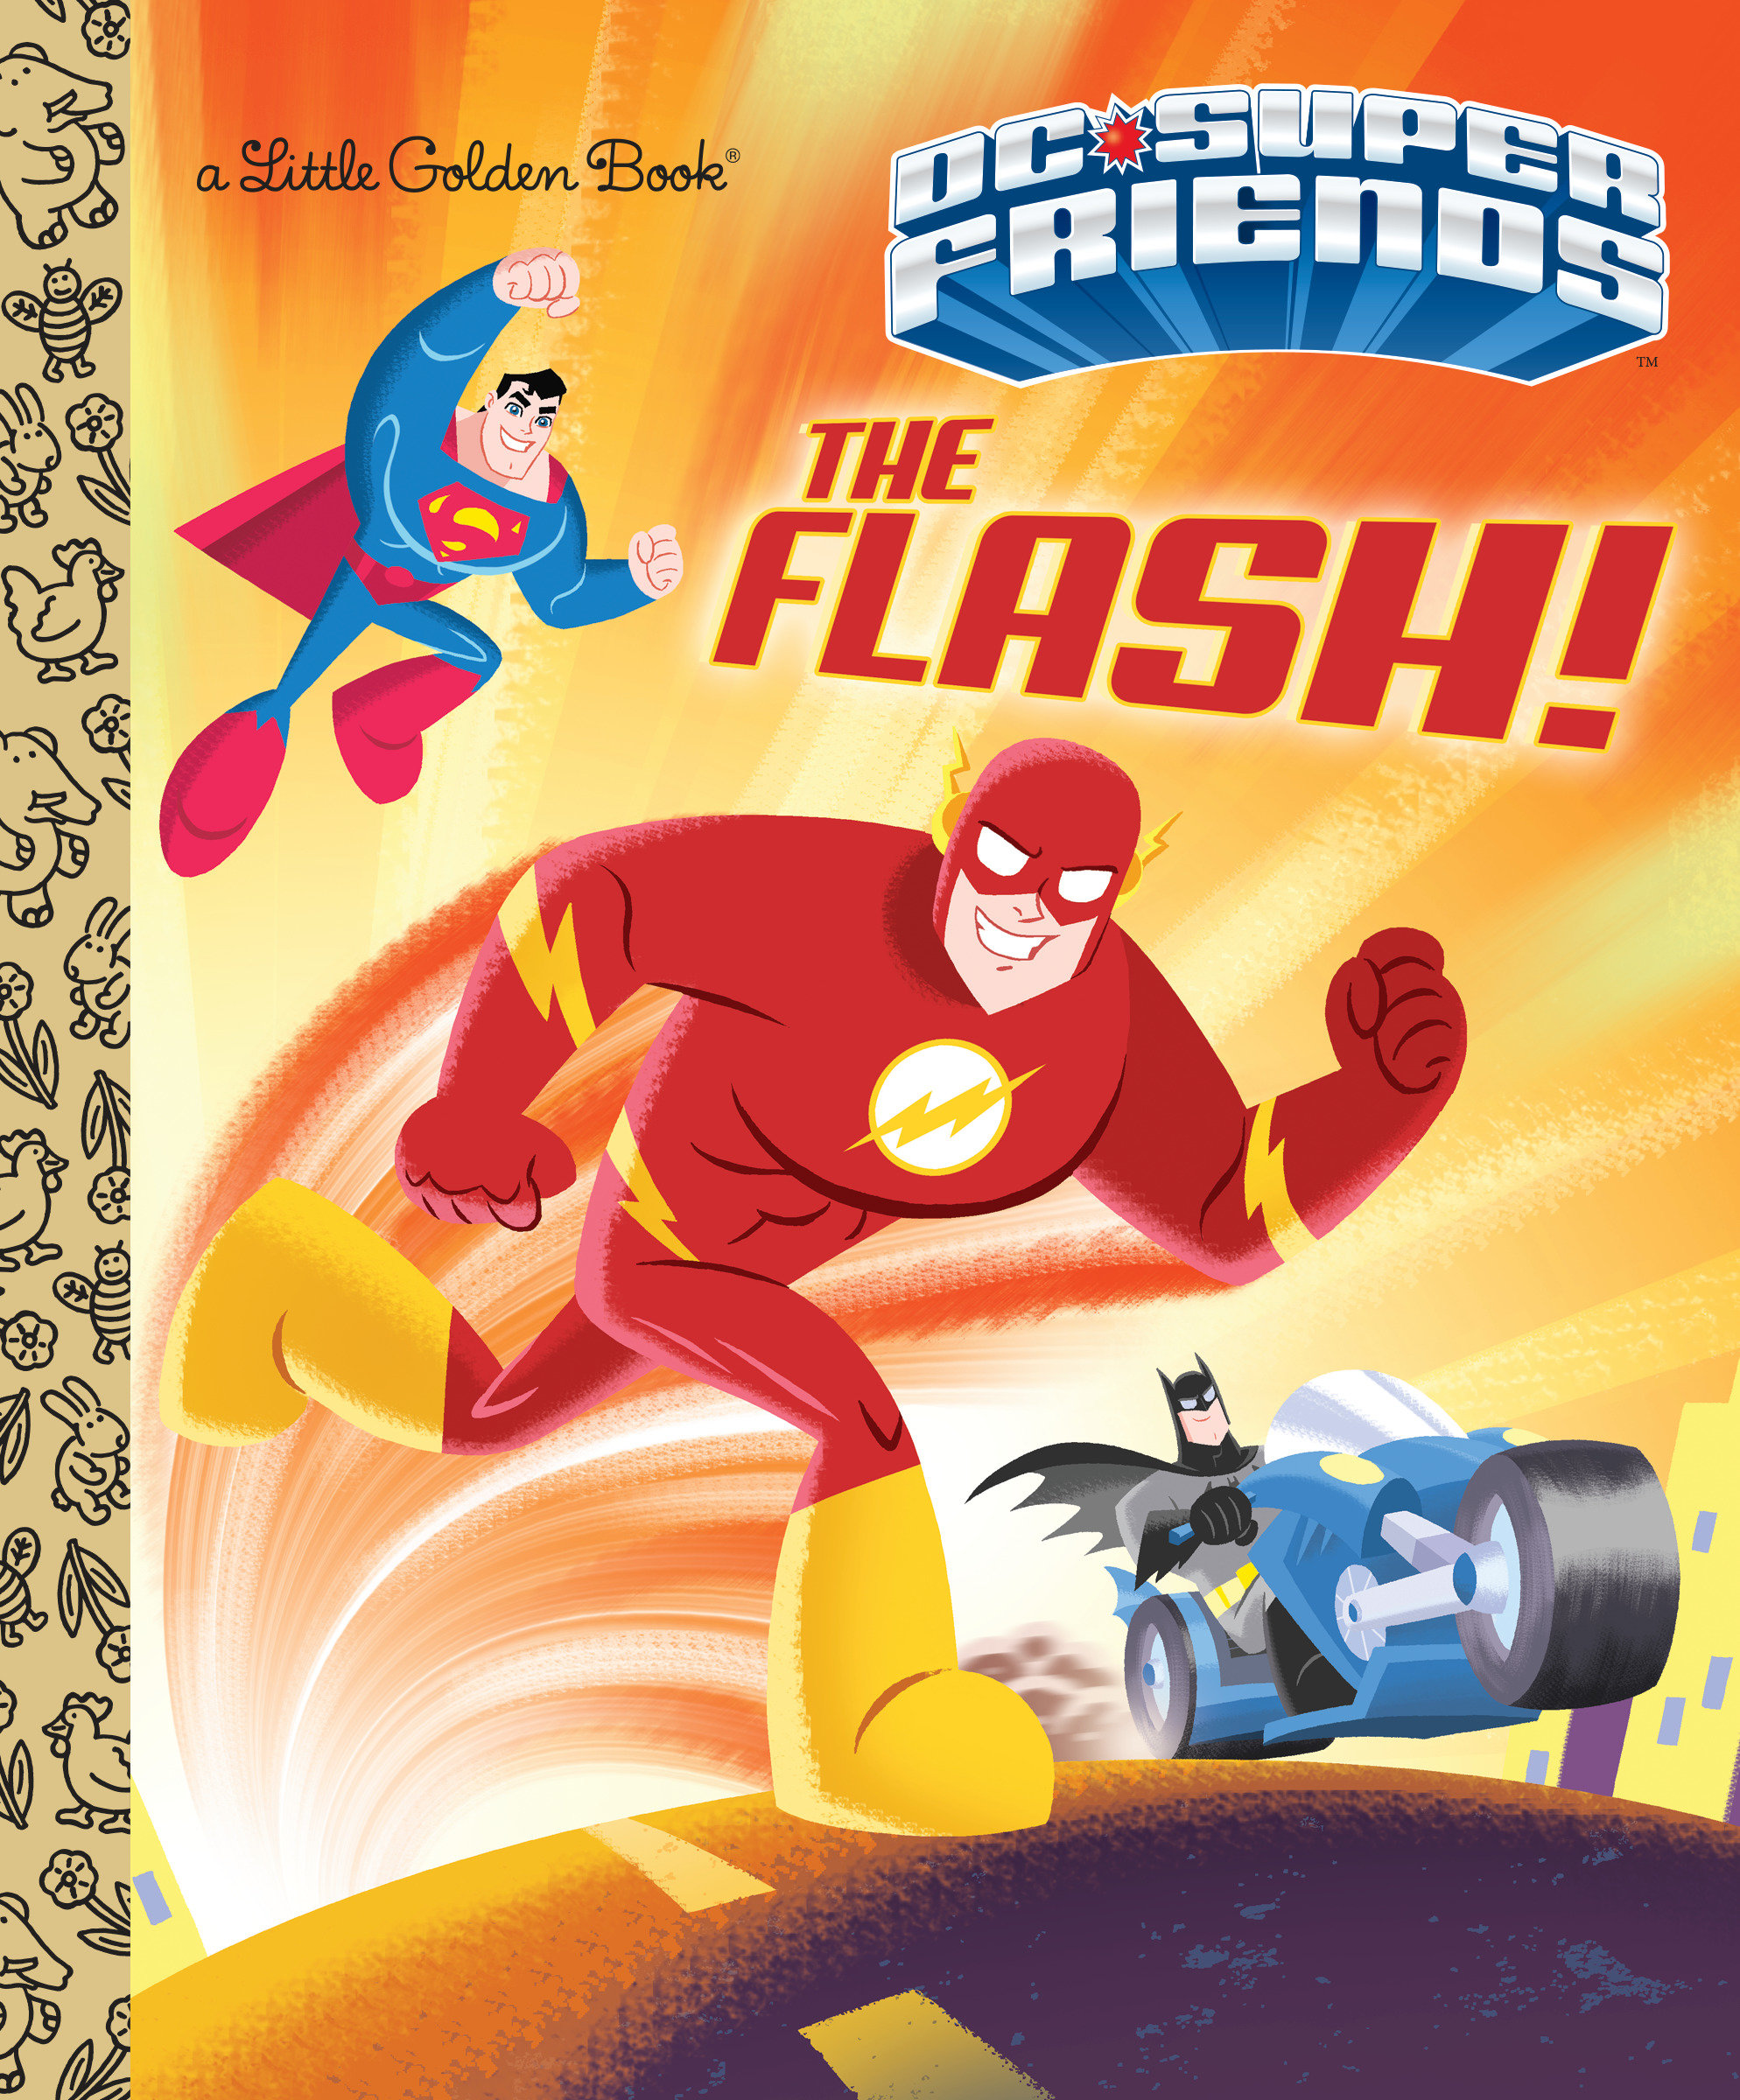 The Flash! cover image